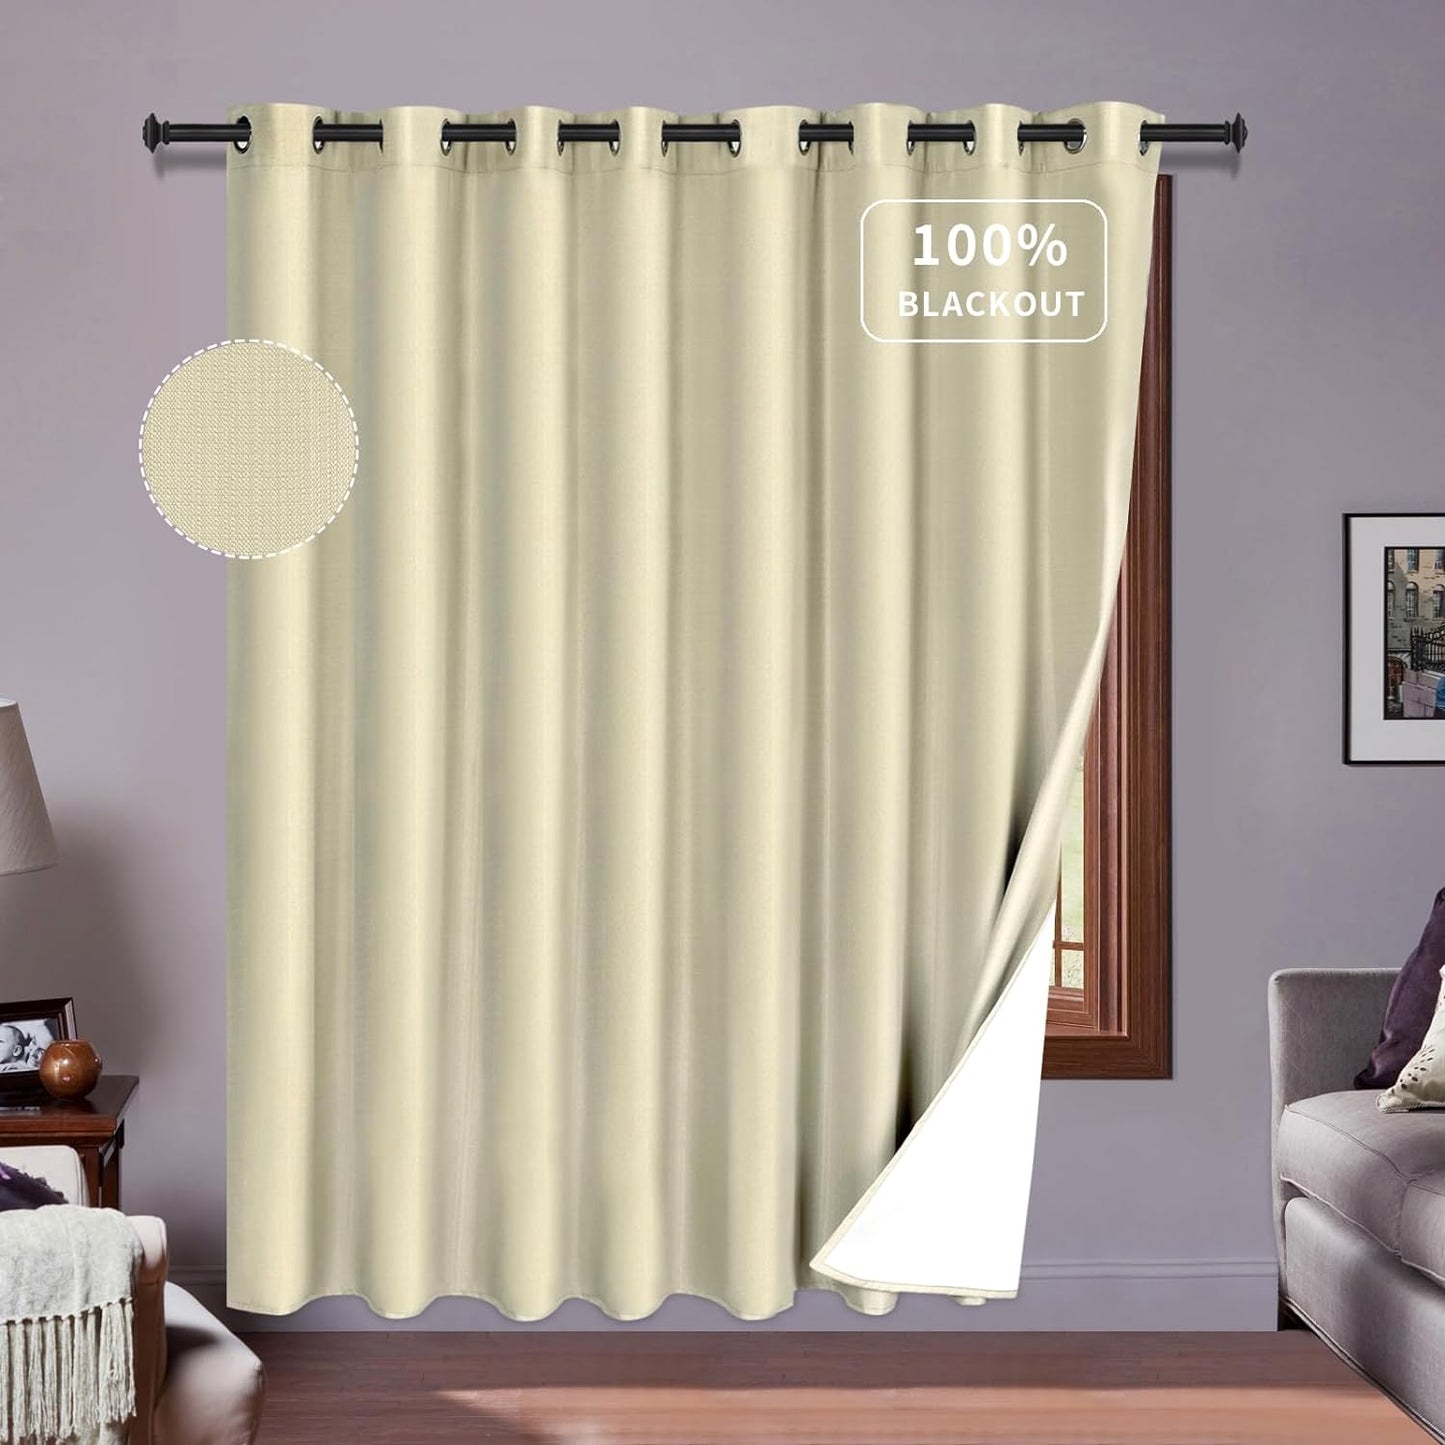 Purefit White Linen Blackout Curtains 84 Inches Long 100% Room Darkening Thermal Insulated Window Curtain Drapes for Bedroom Living Room Nursery with Anti-Rust Grommets & Energy Saving Liner, 2 Panels  PureFit Beige 100"W X 84"L 